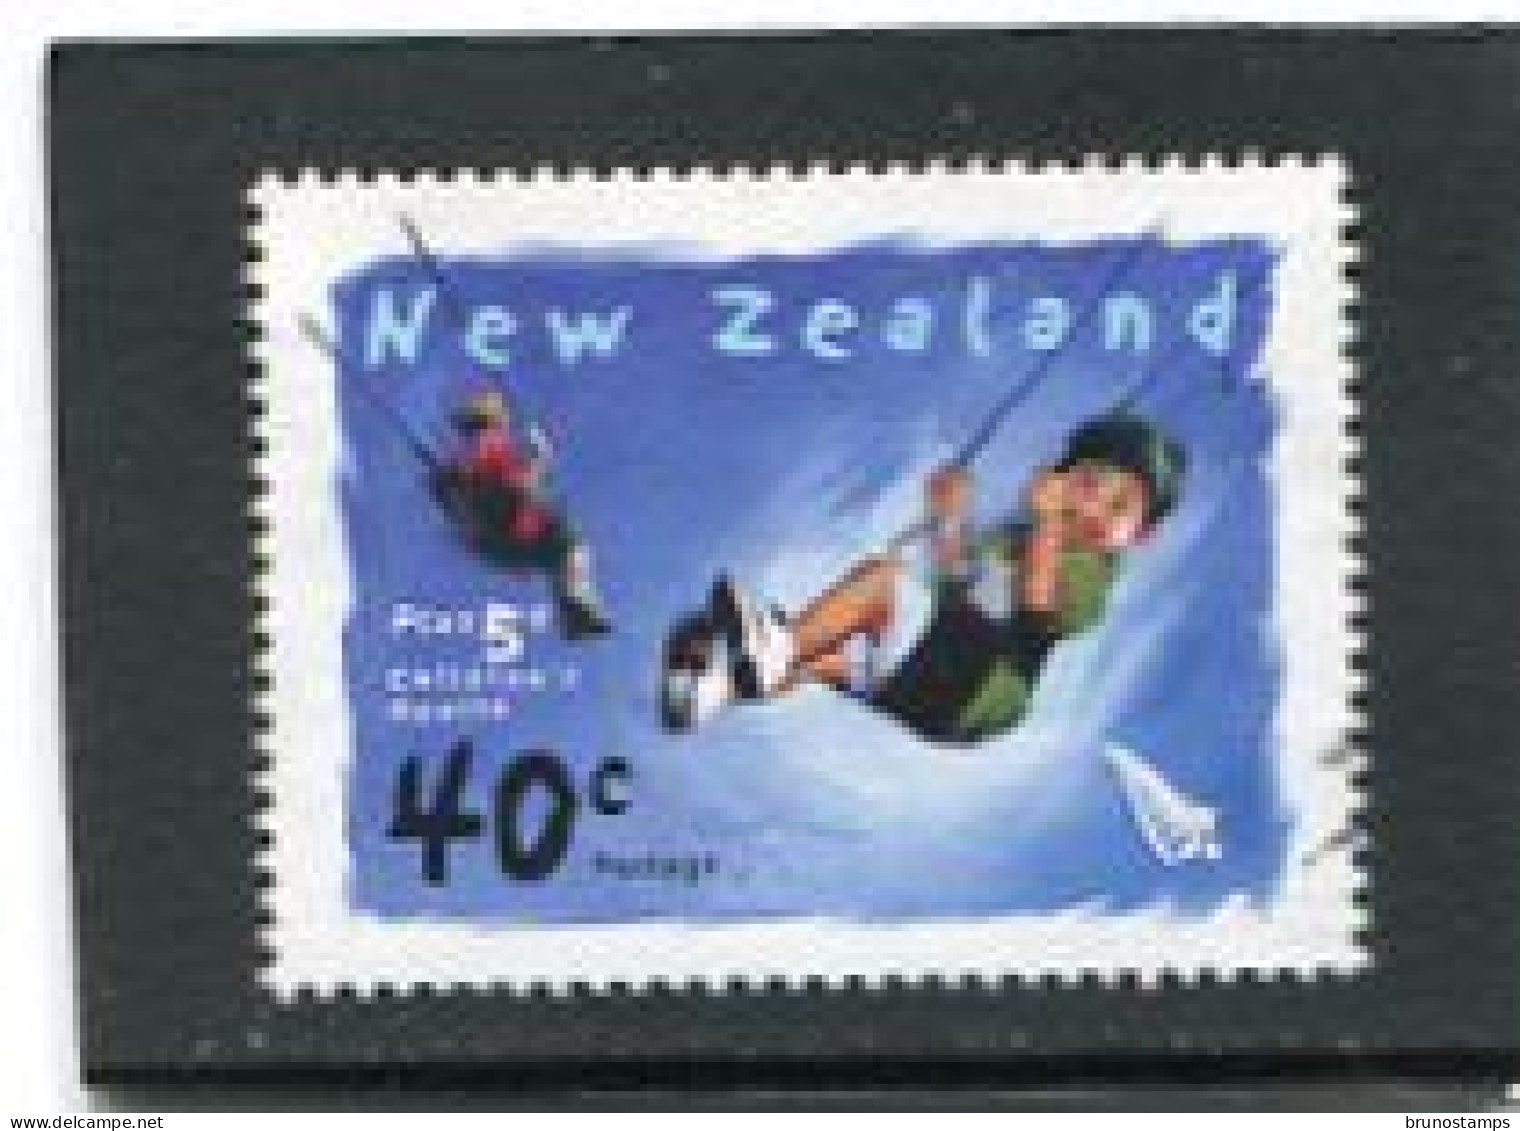 NEW ZEALAND - 2003  40c+5c  HEALTH  FINE  USED - Used Stamps